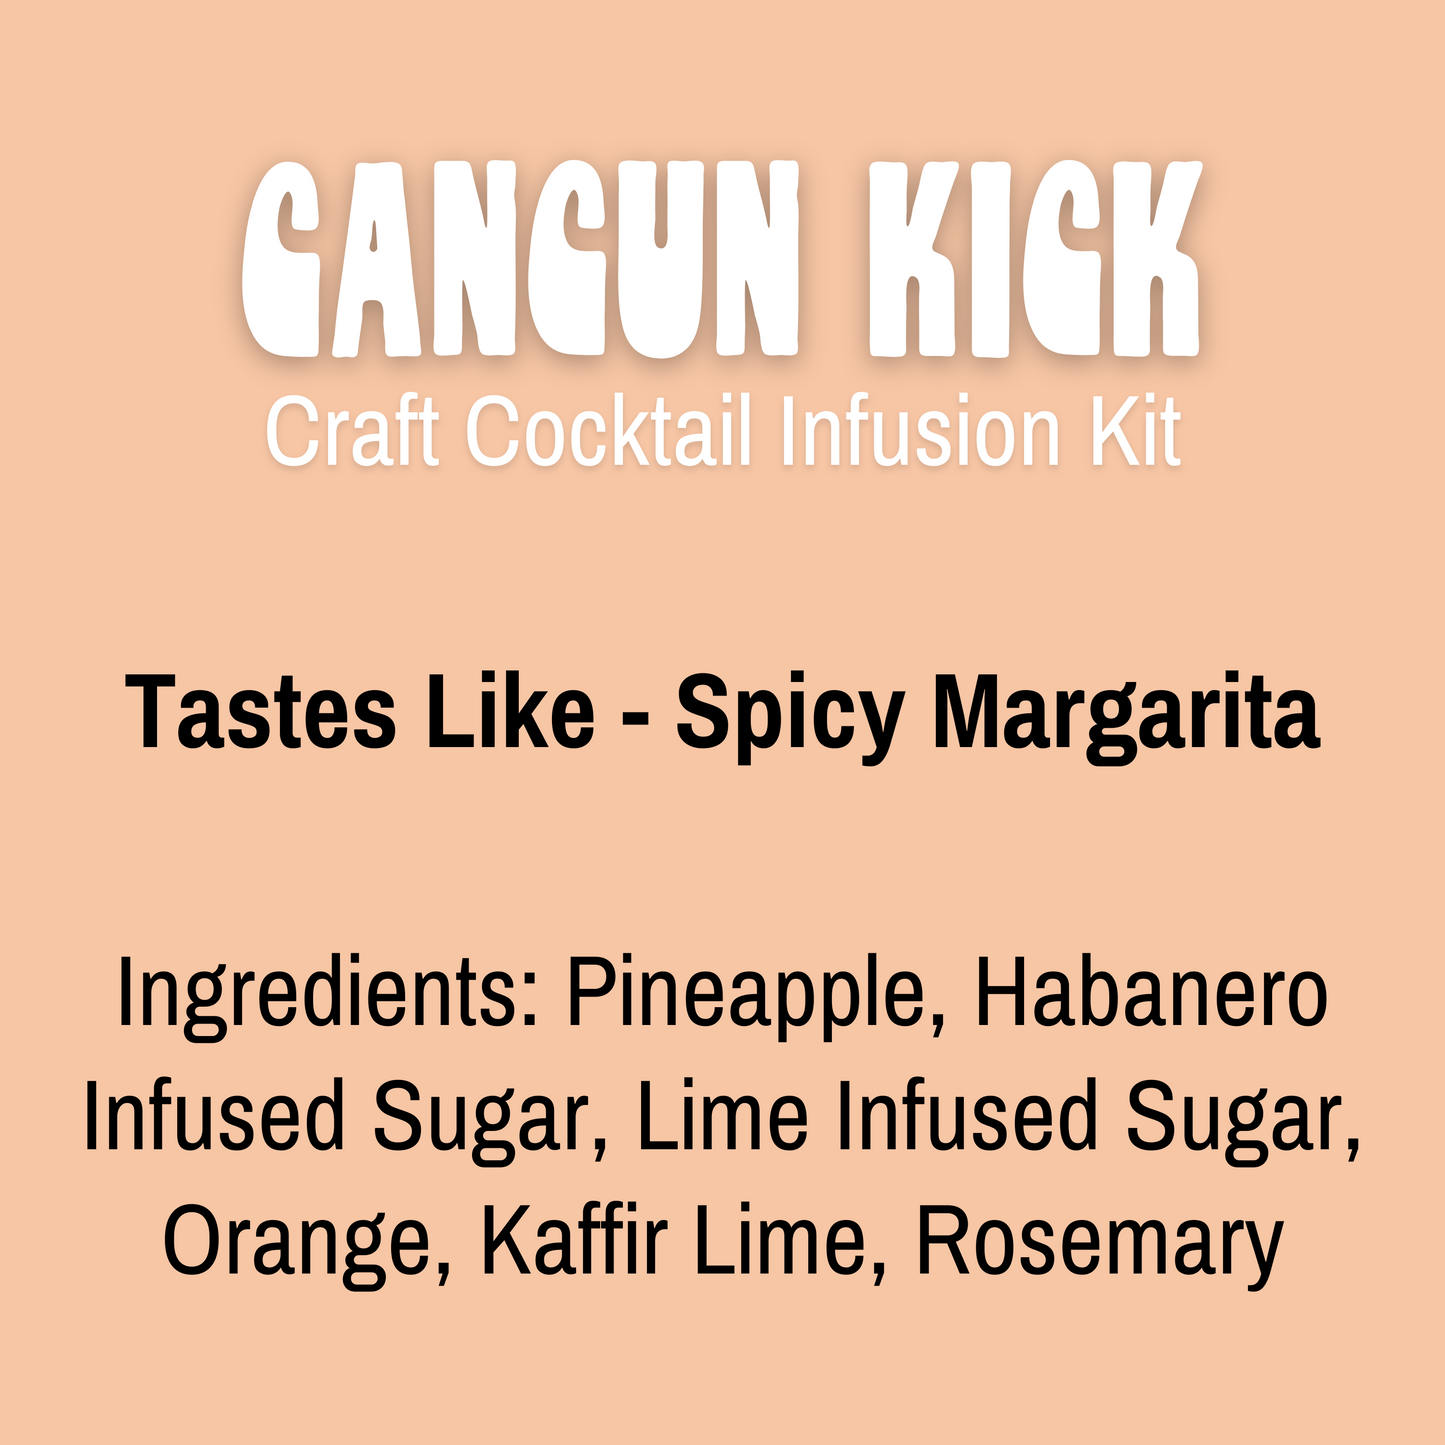 Load image into Gallery viewer, Cancun Kick Craft Cocktail Infusion Kit
